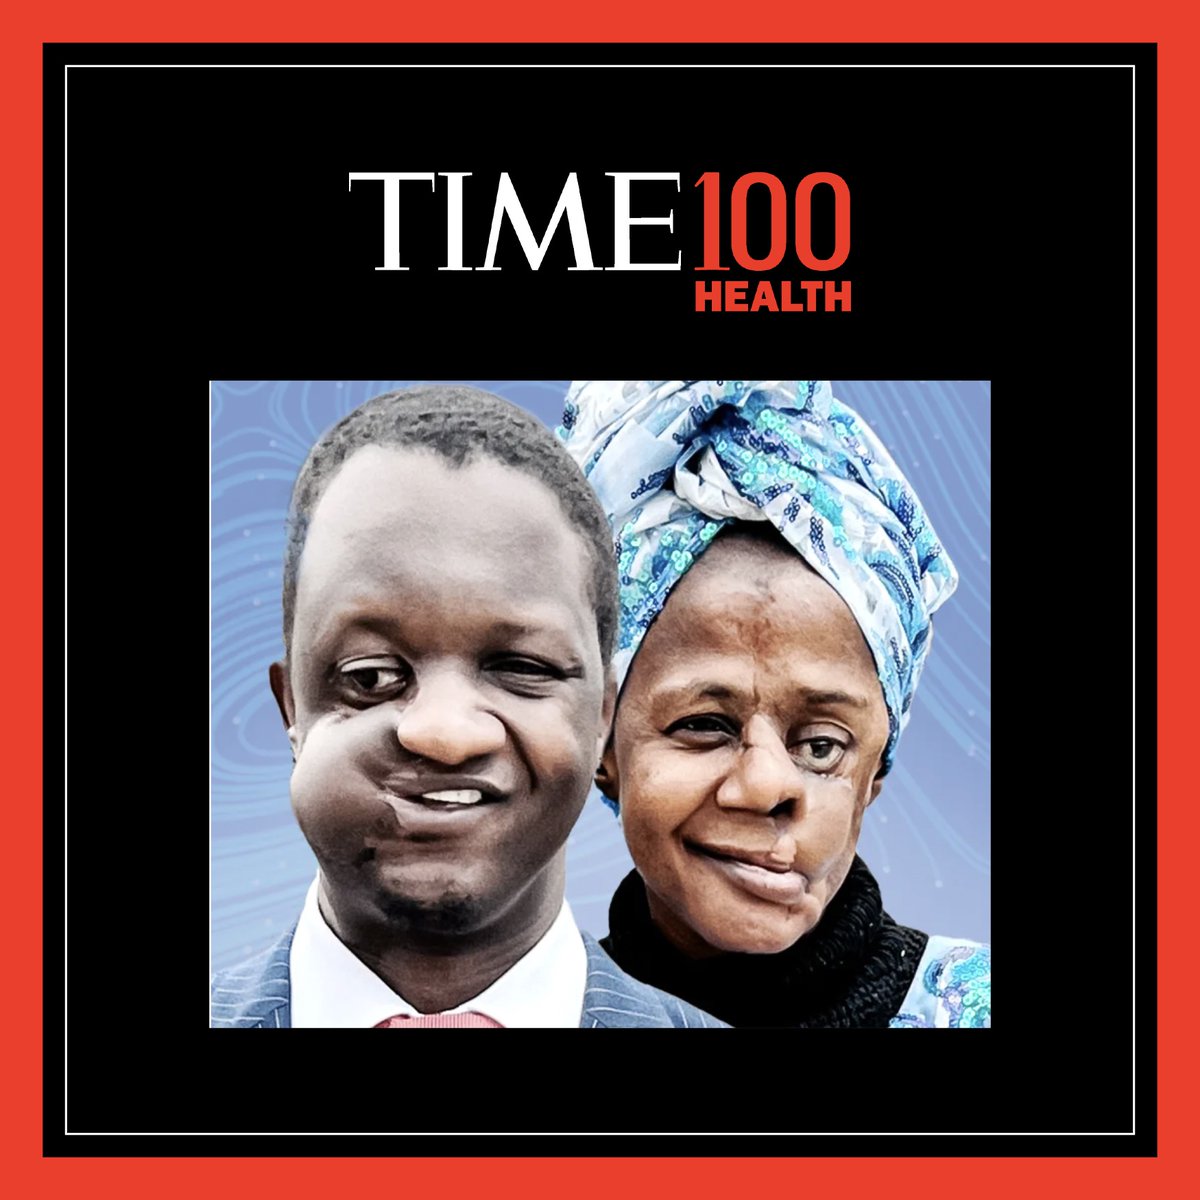 @TIME's list of the 100 Most Influential People in global health is out today. Mulikat Okanlawon and Fidel Strub are honored to be a part of this group: time.com/time100health Photo by @Inediz